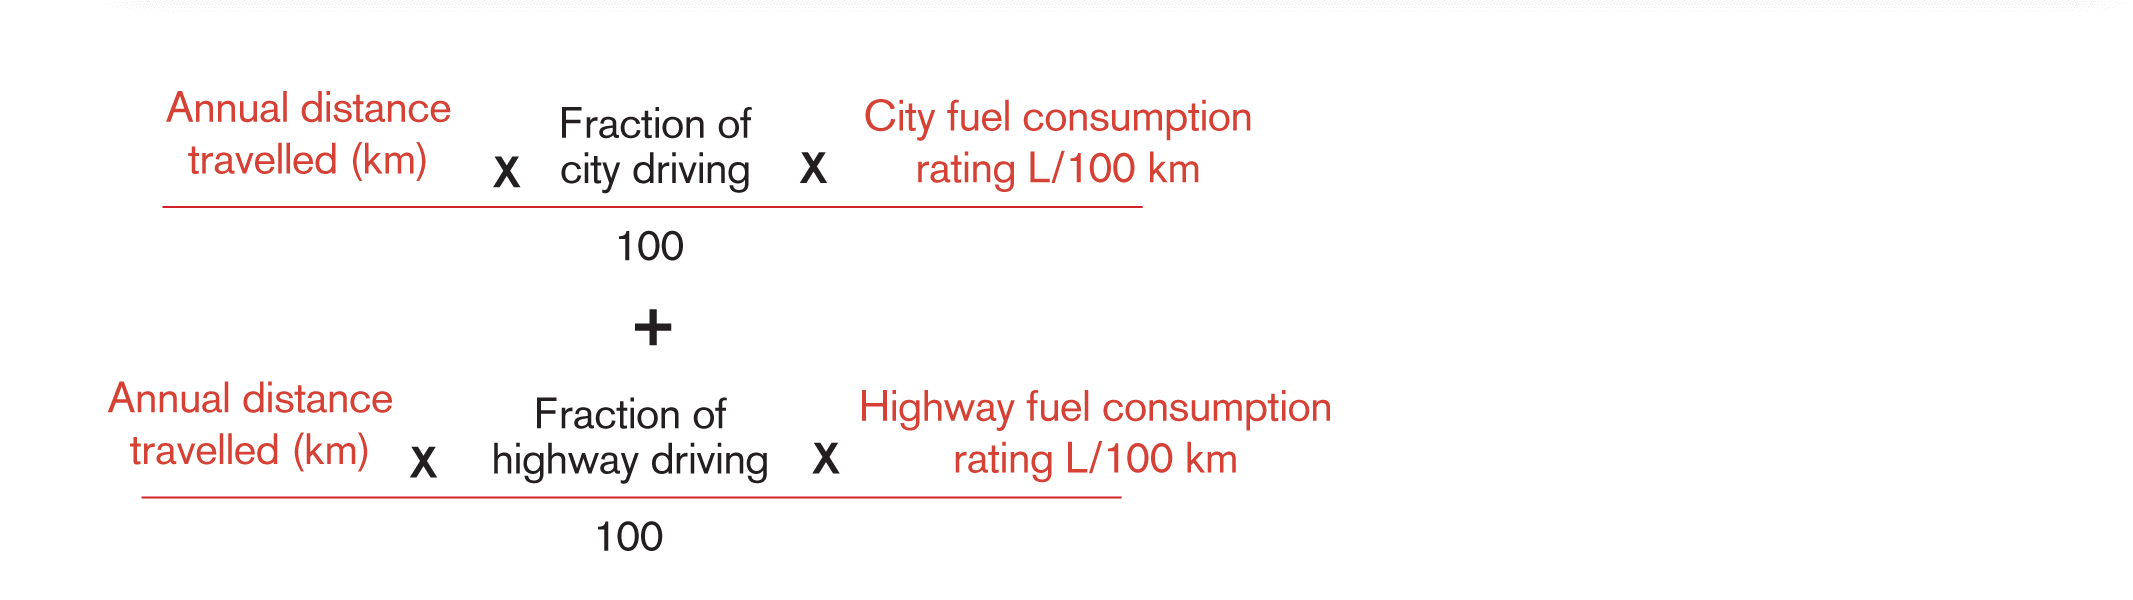 how much fuel will your car consume B image